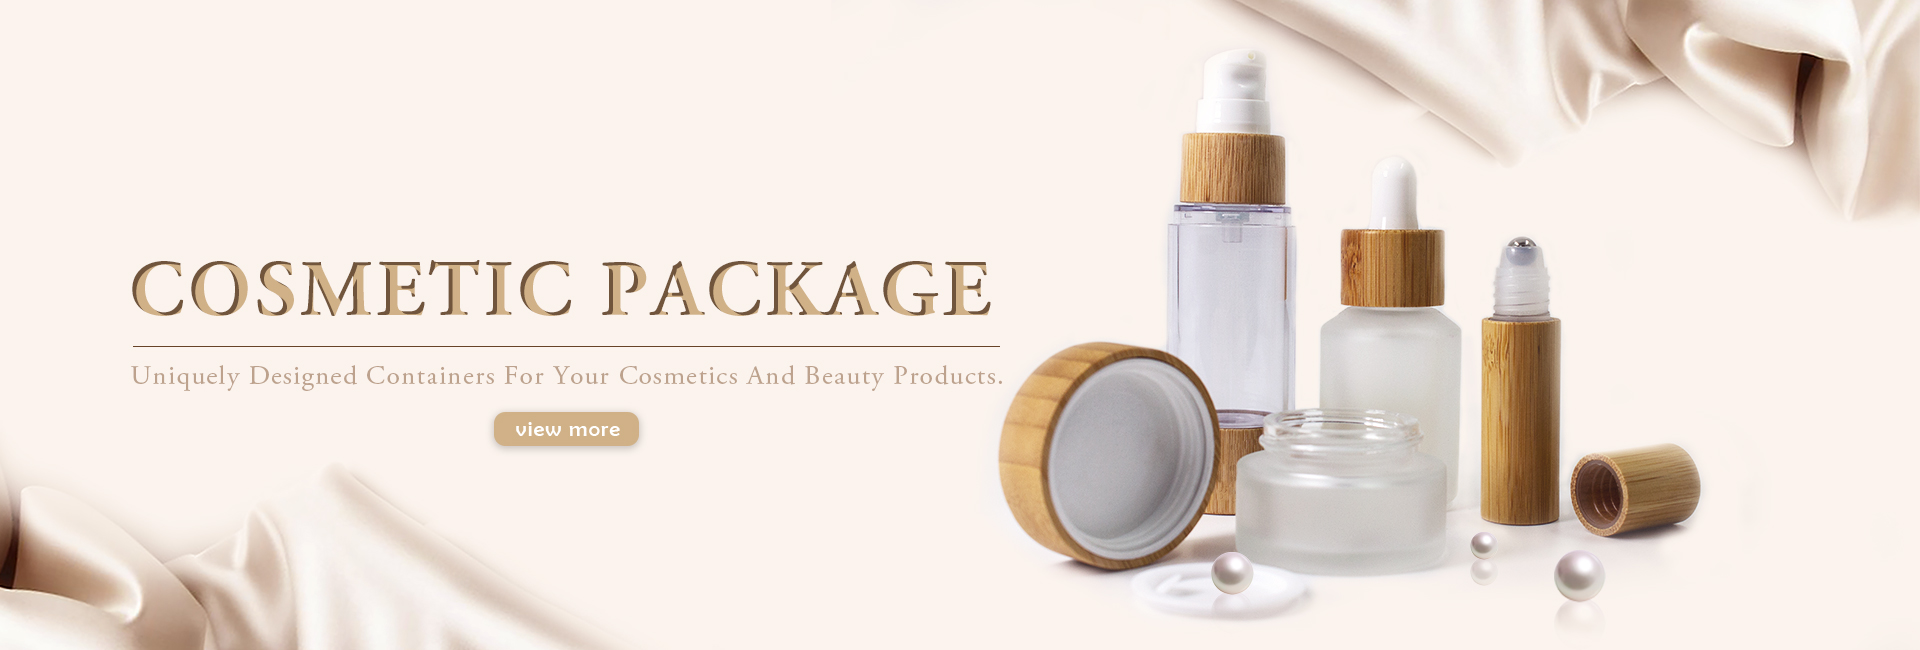 cosmetic package